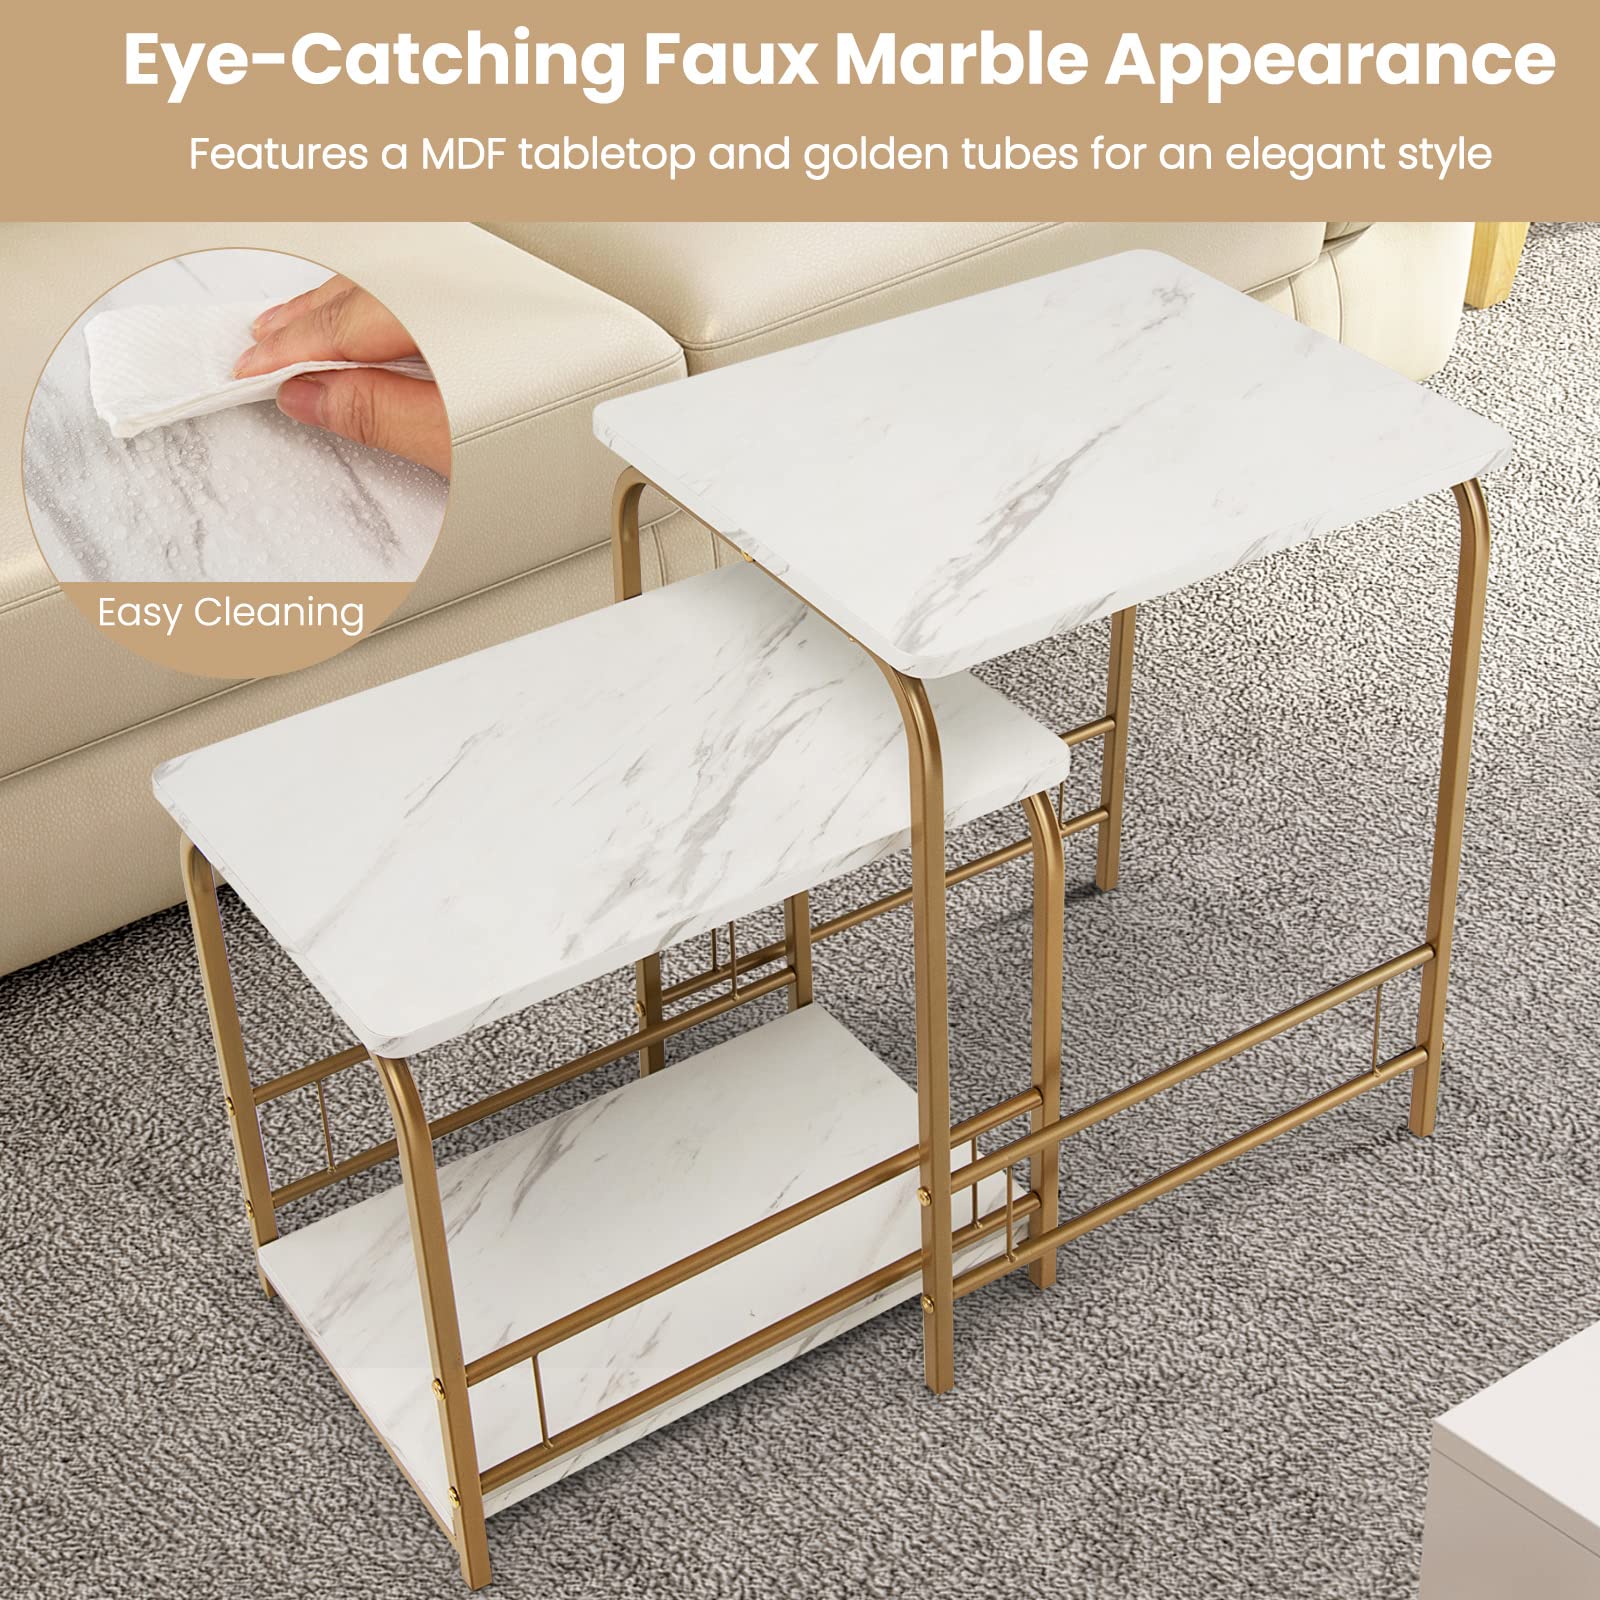 Giantex Nesting Tables Set of 2, Faux Marble End Table Sets